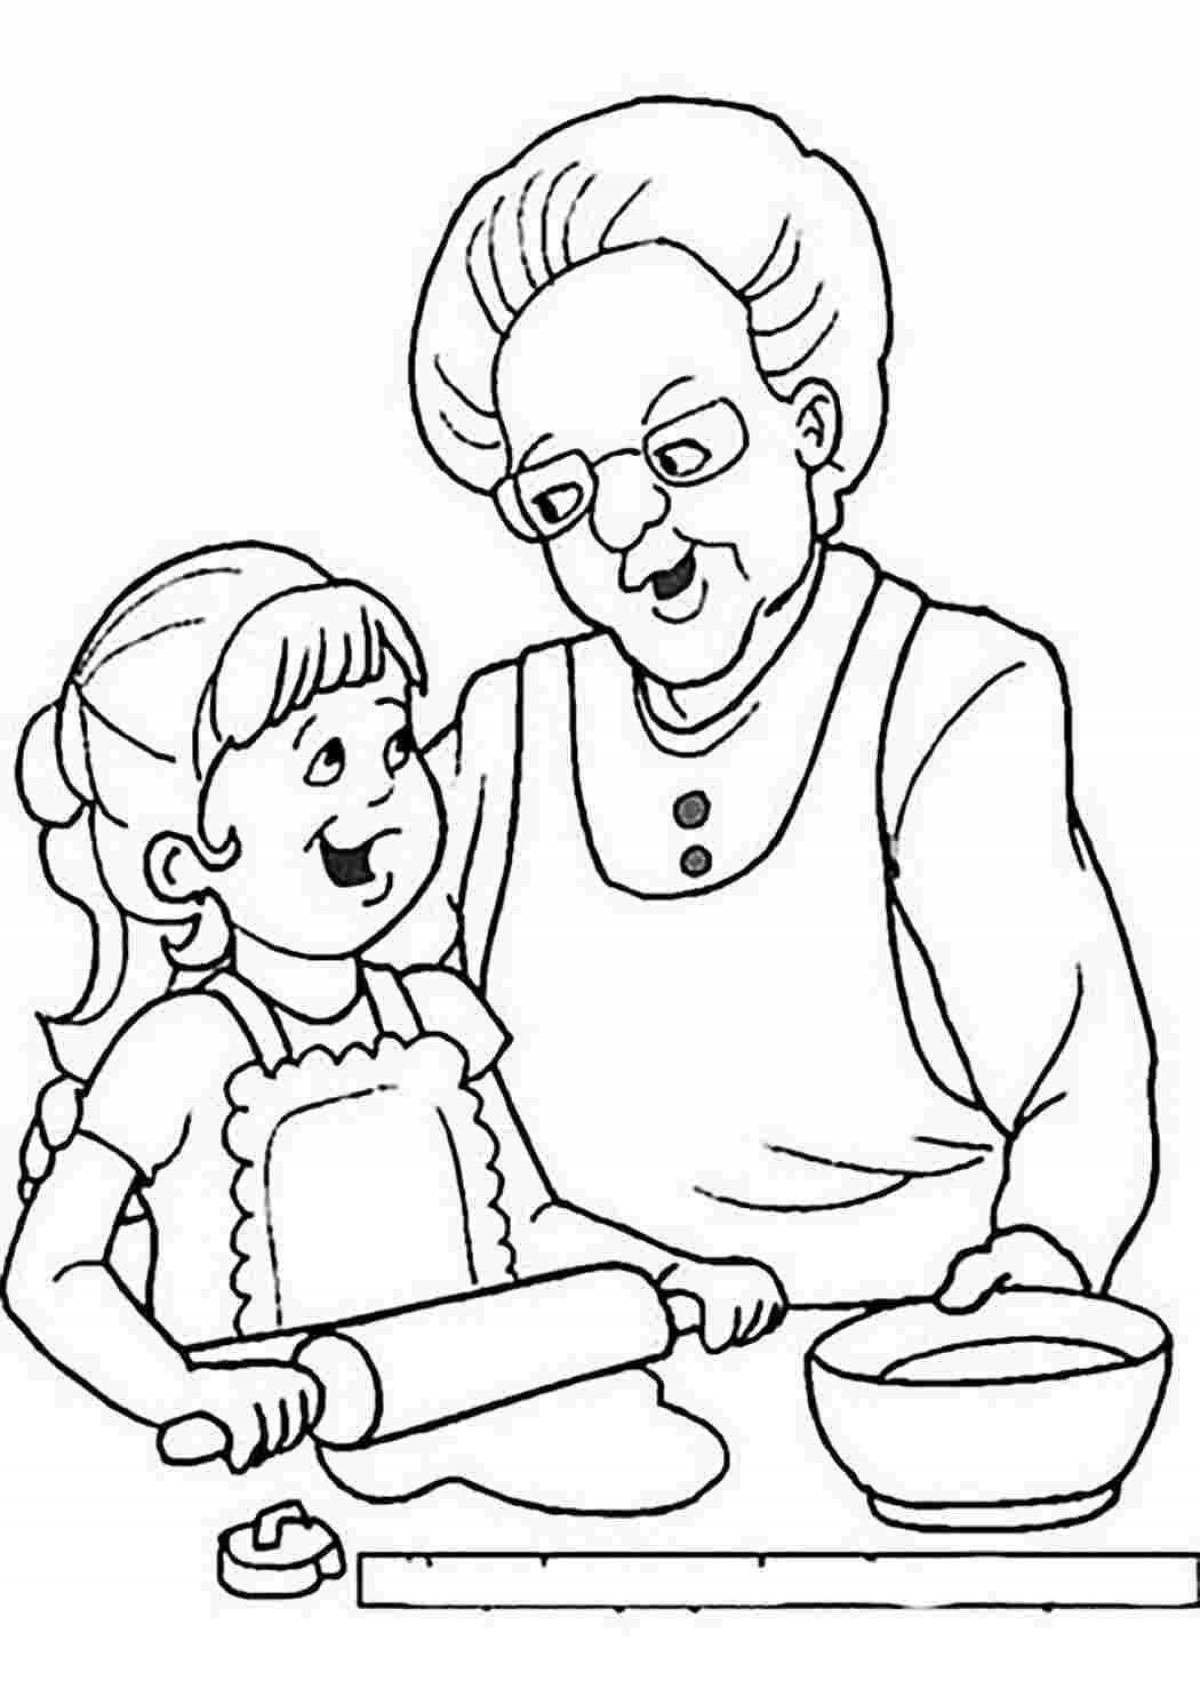 Color-based coloring book for older people with dementia